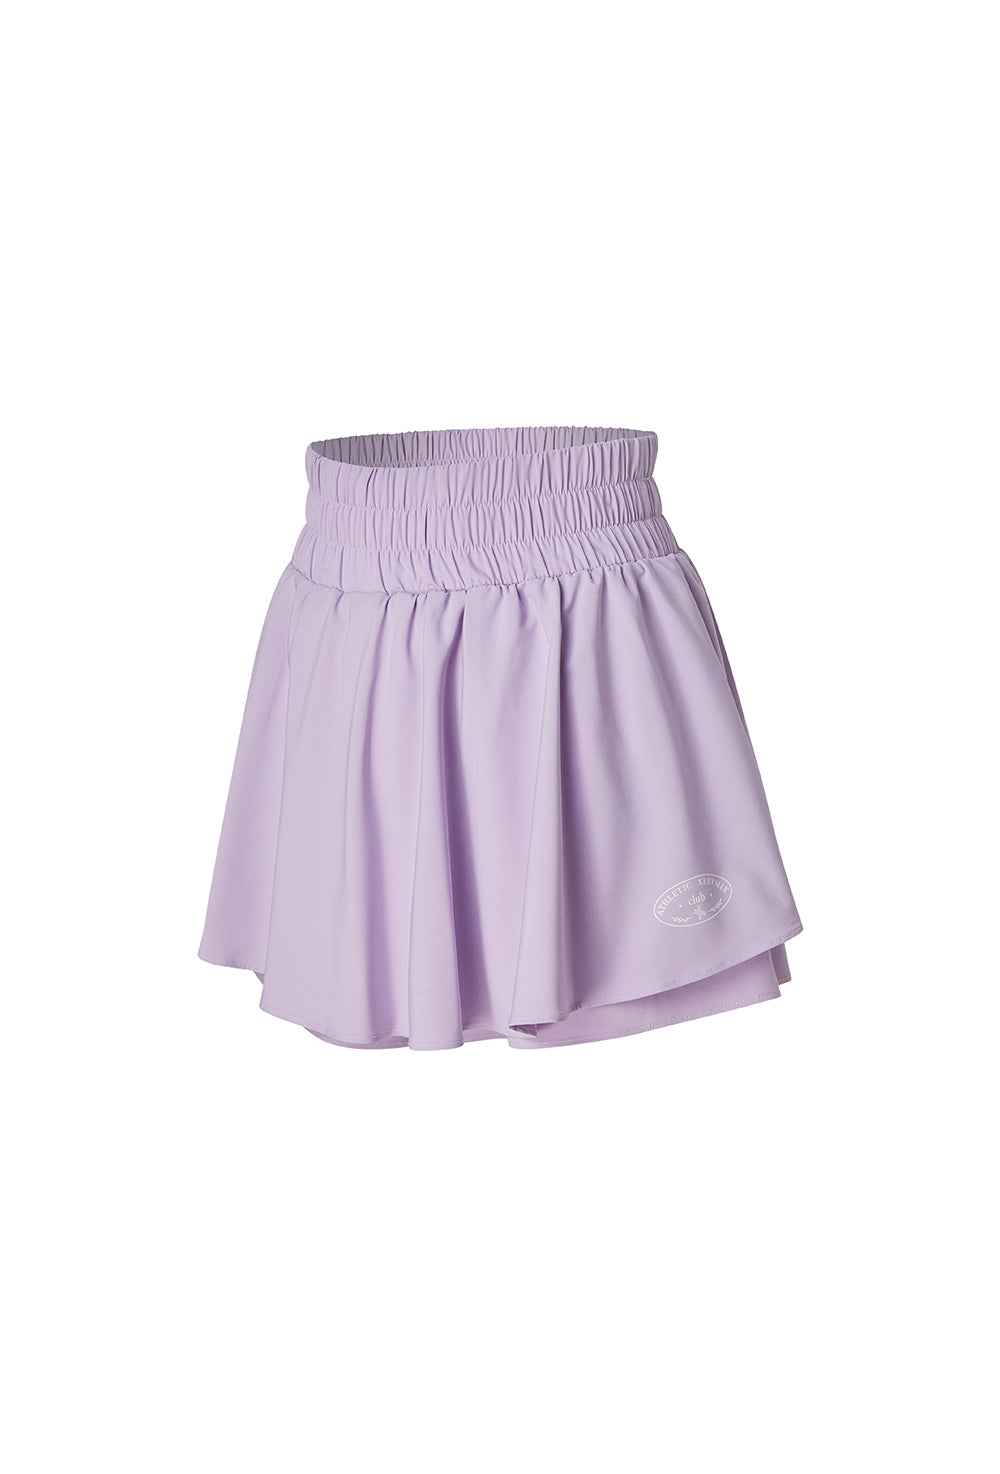 2-in-1 Layered Shorts - Lavender Fog